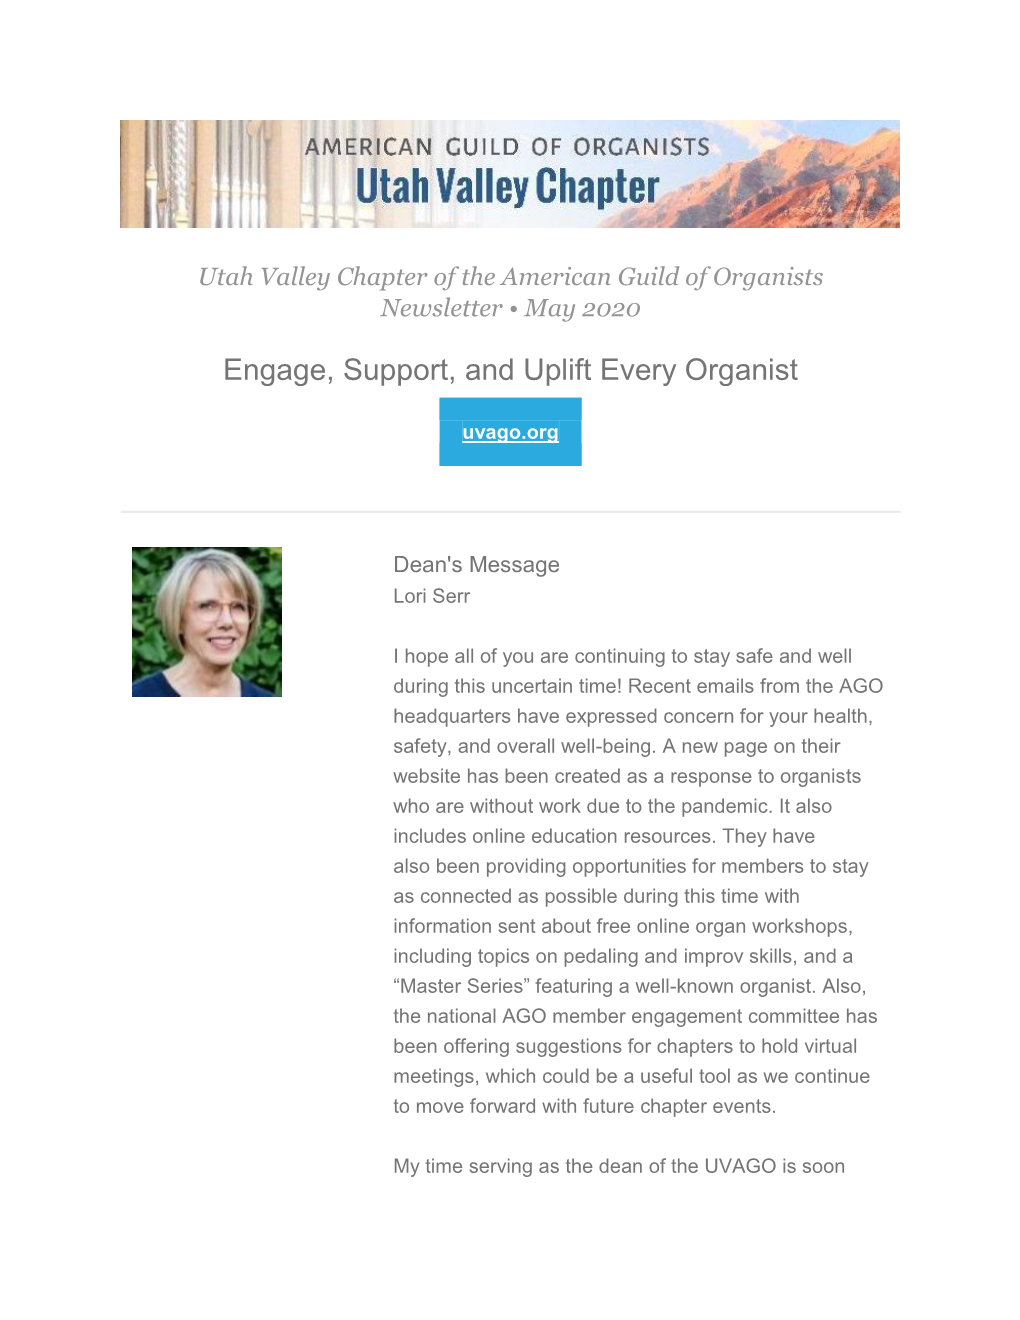 Engage, Support, and Uplift Every Organist